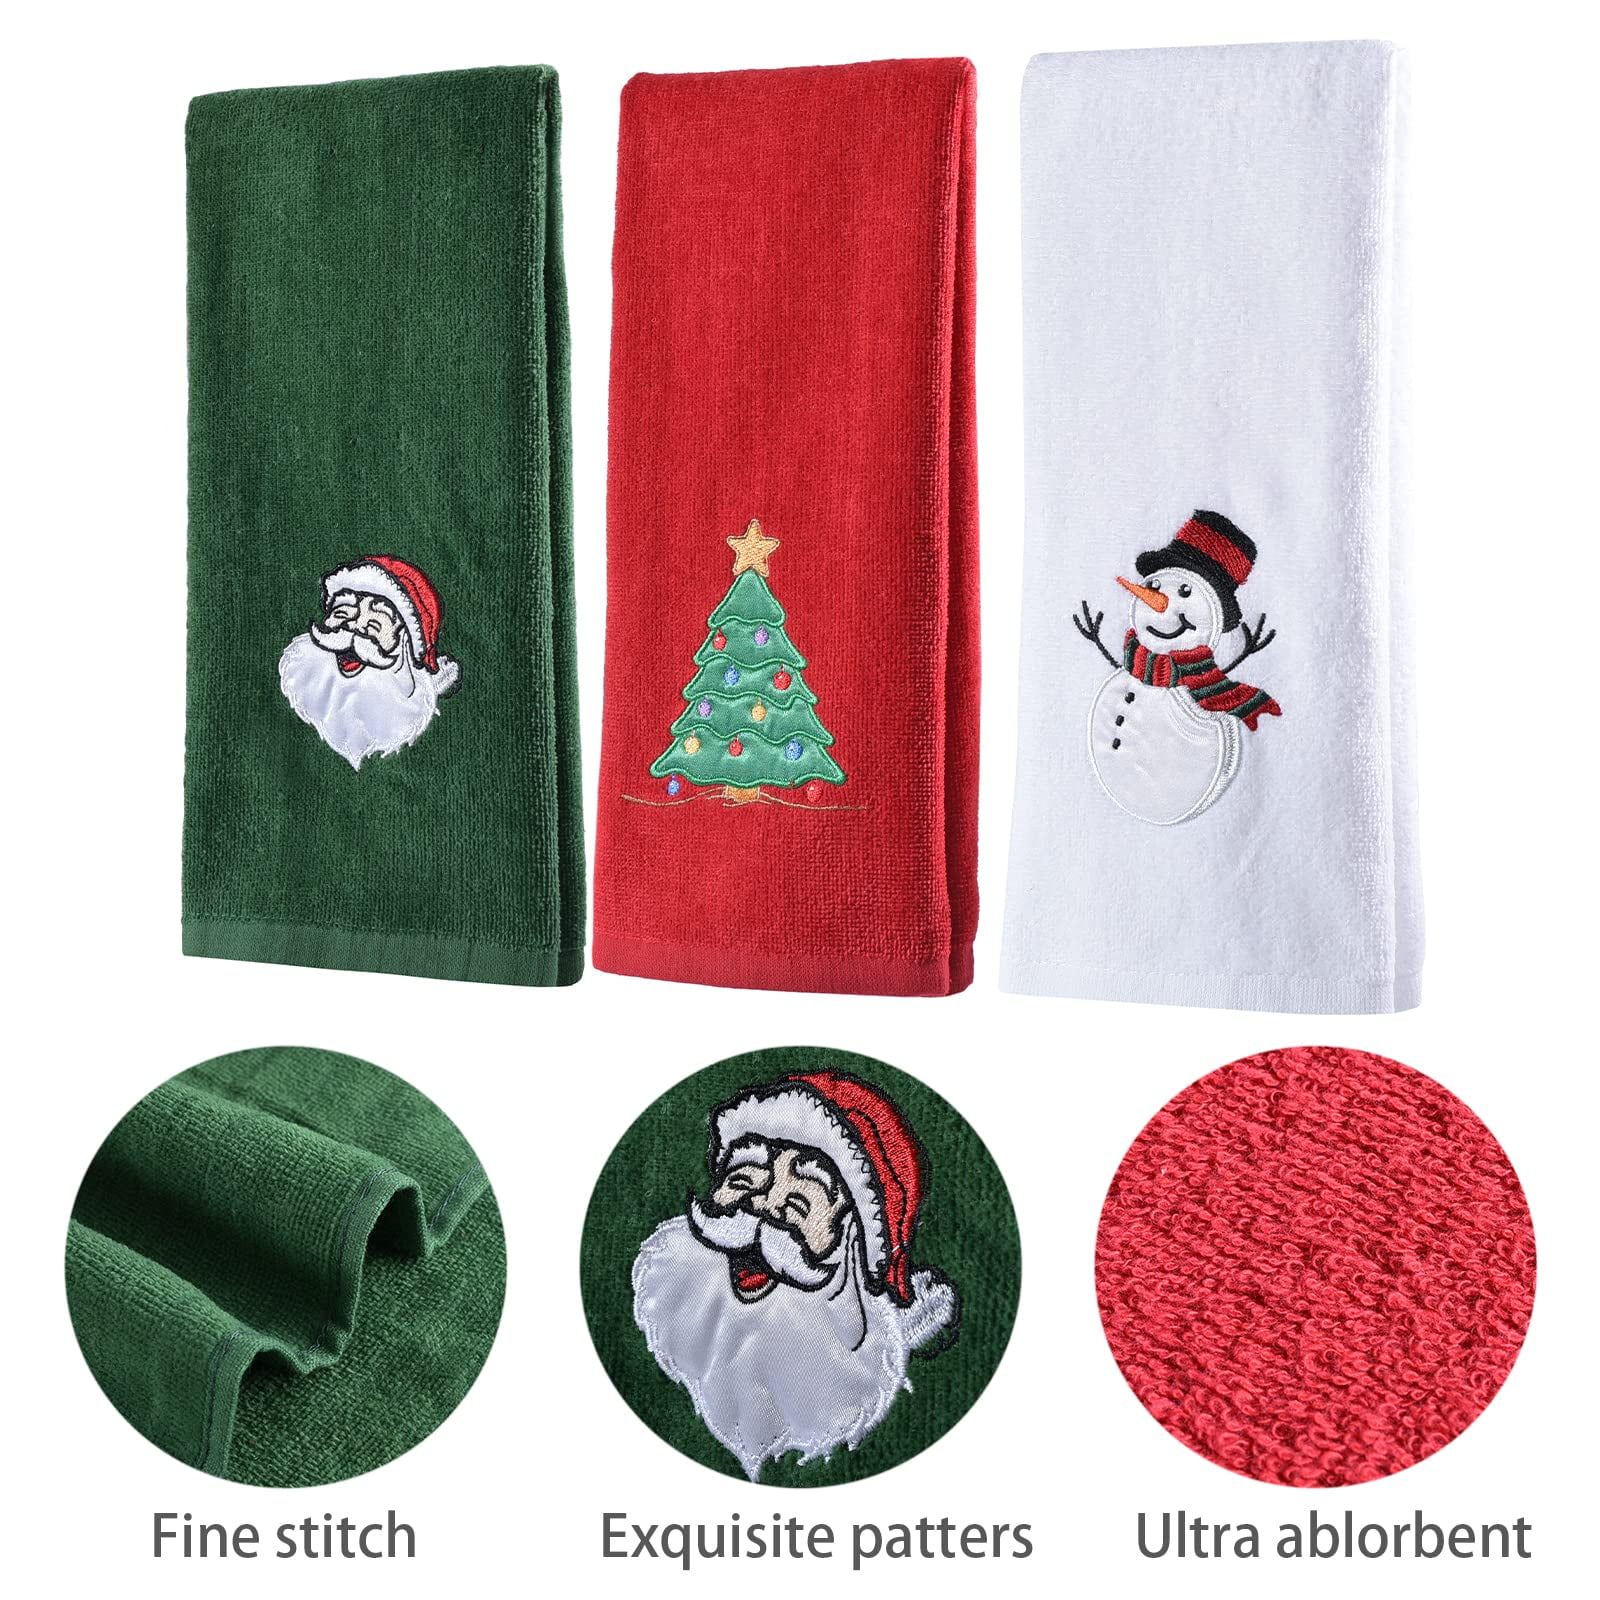 3 Pack Christmas Hand Towels Washcloths 13x18 in, Embroidered Kitchen Dish  Towels for Cleaning Drying, Cotton Christmas Towels Face Wash Cloth for  Holiday Decor Towels Gift 